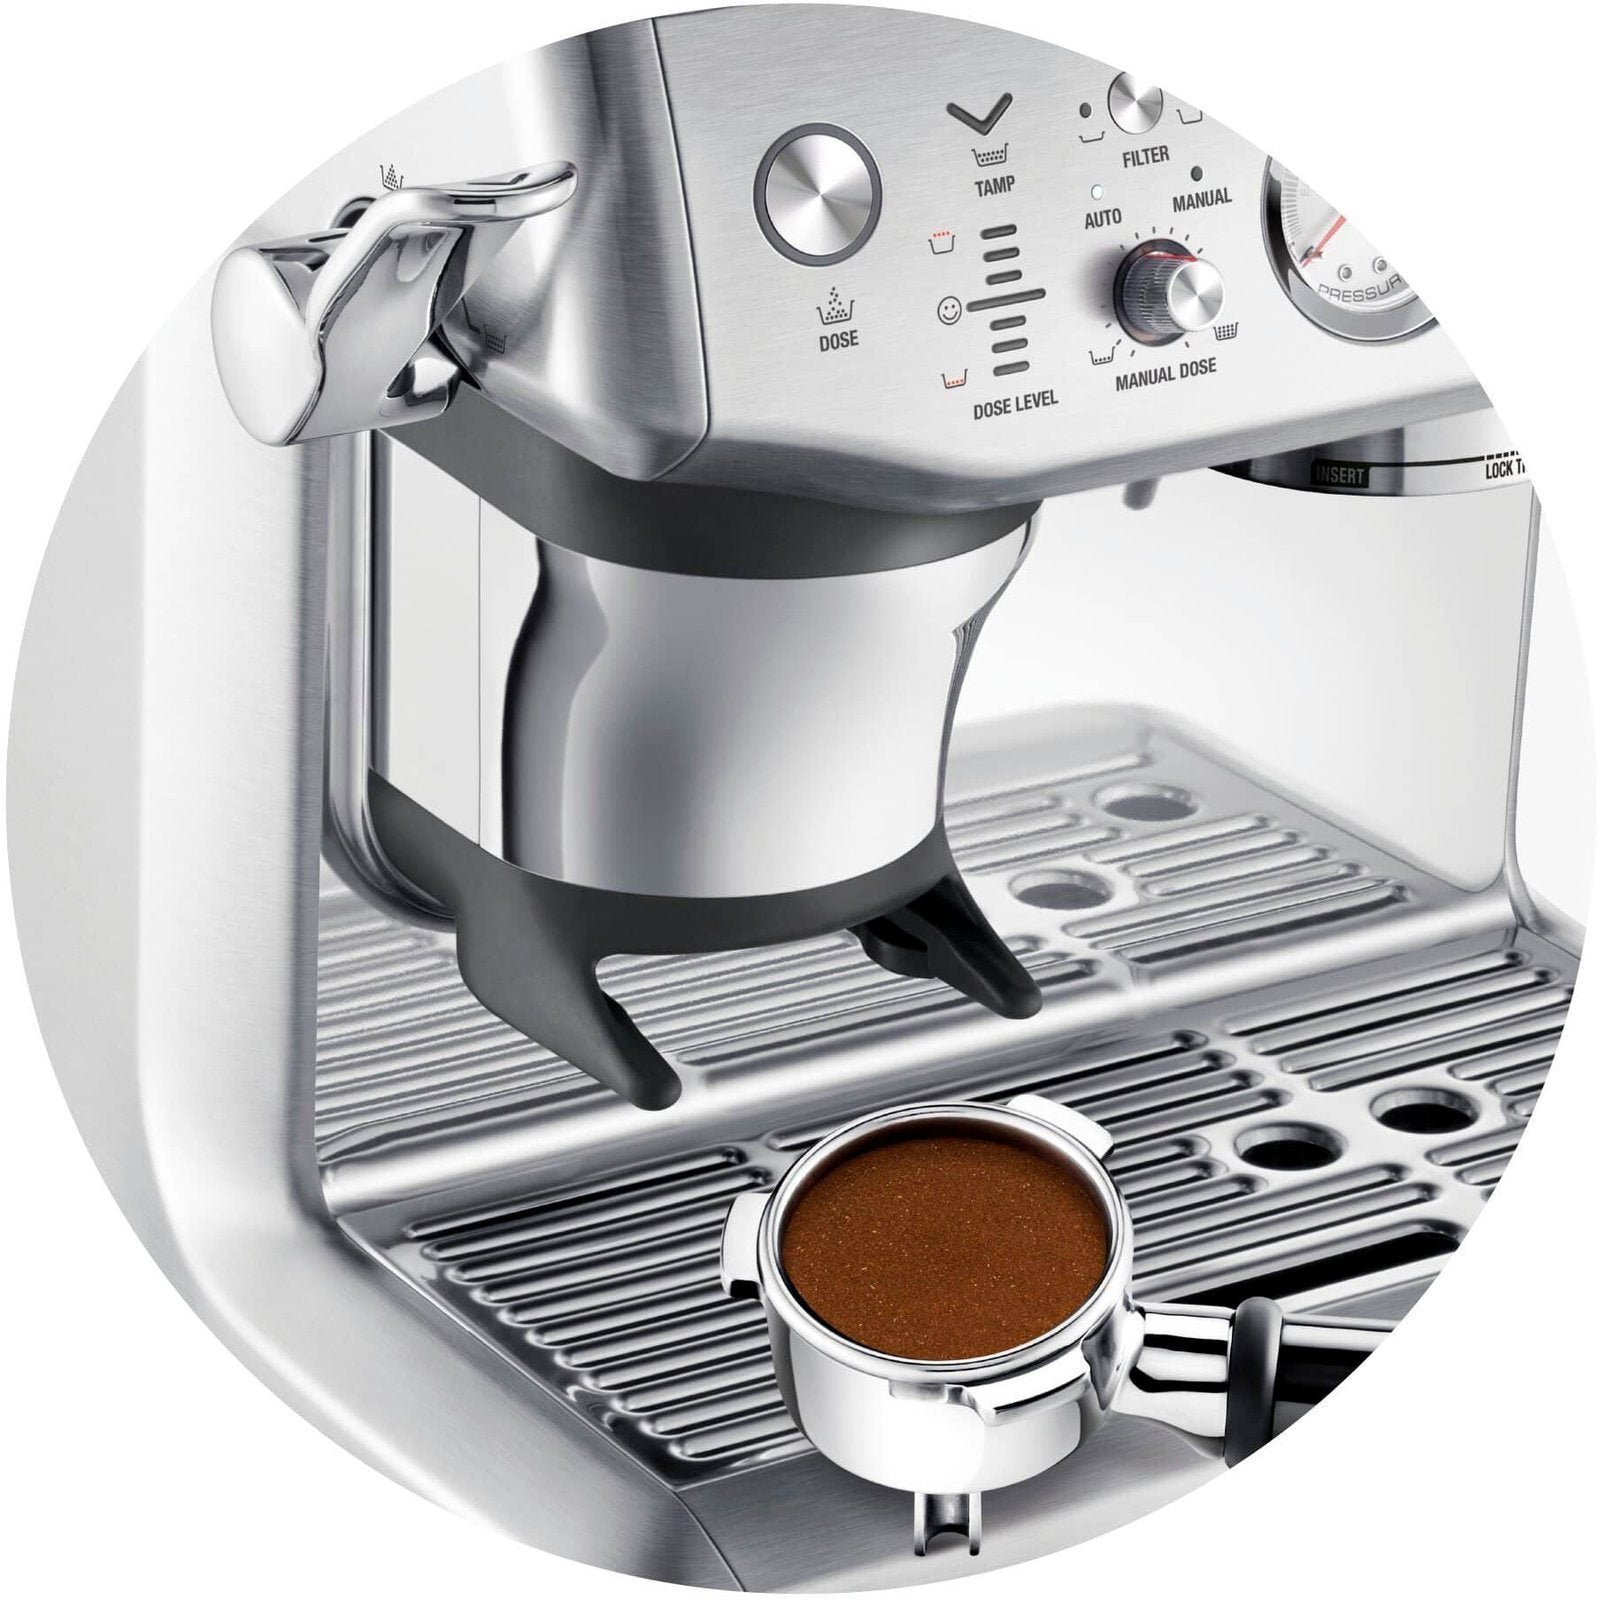 Breville – the Barista Express Impress Espresso Machine – Brushed Stainless Steel